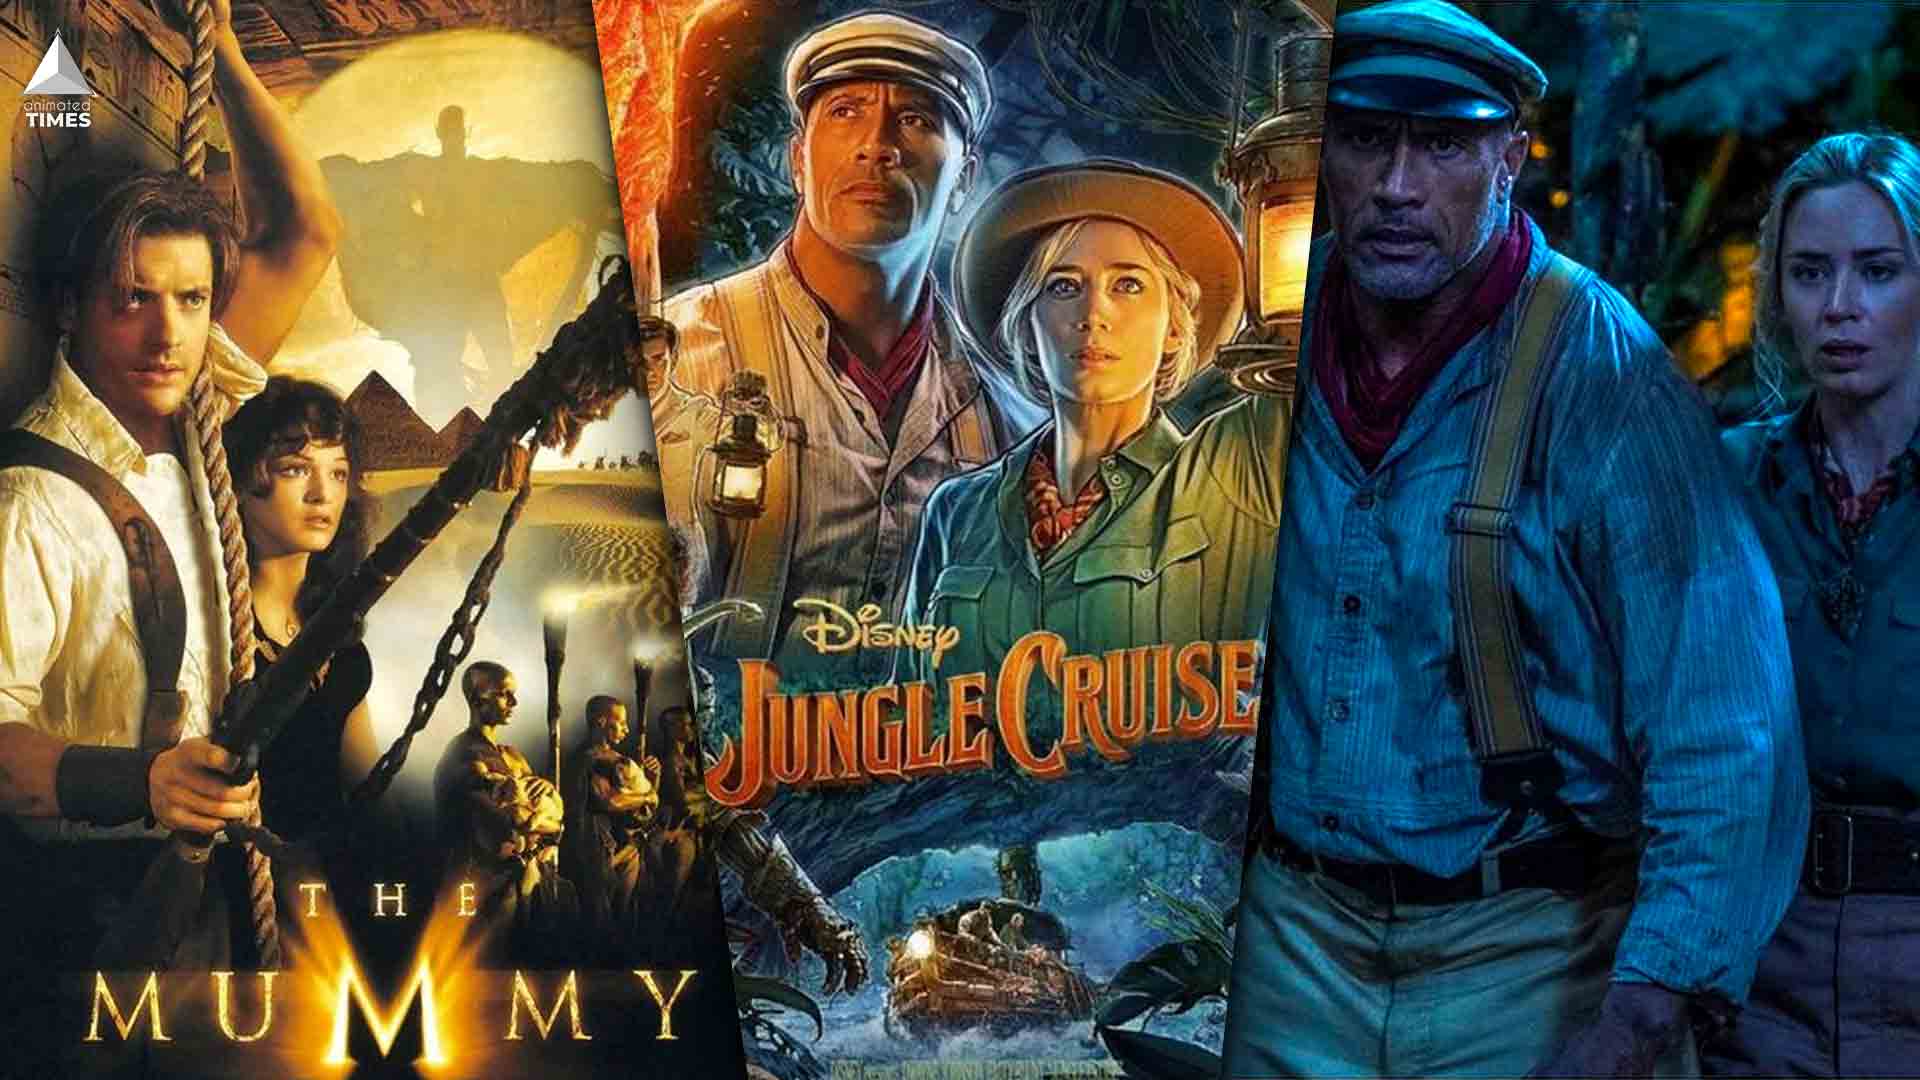 Jungle Cruise: The Trailers Show It Is Copying The Mummy